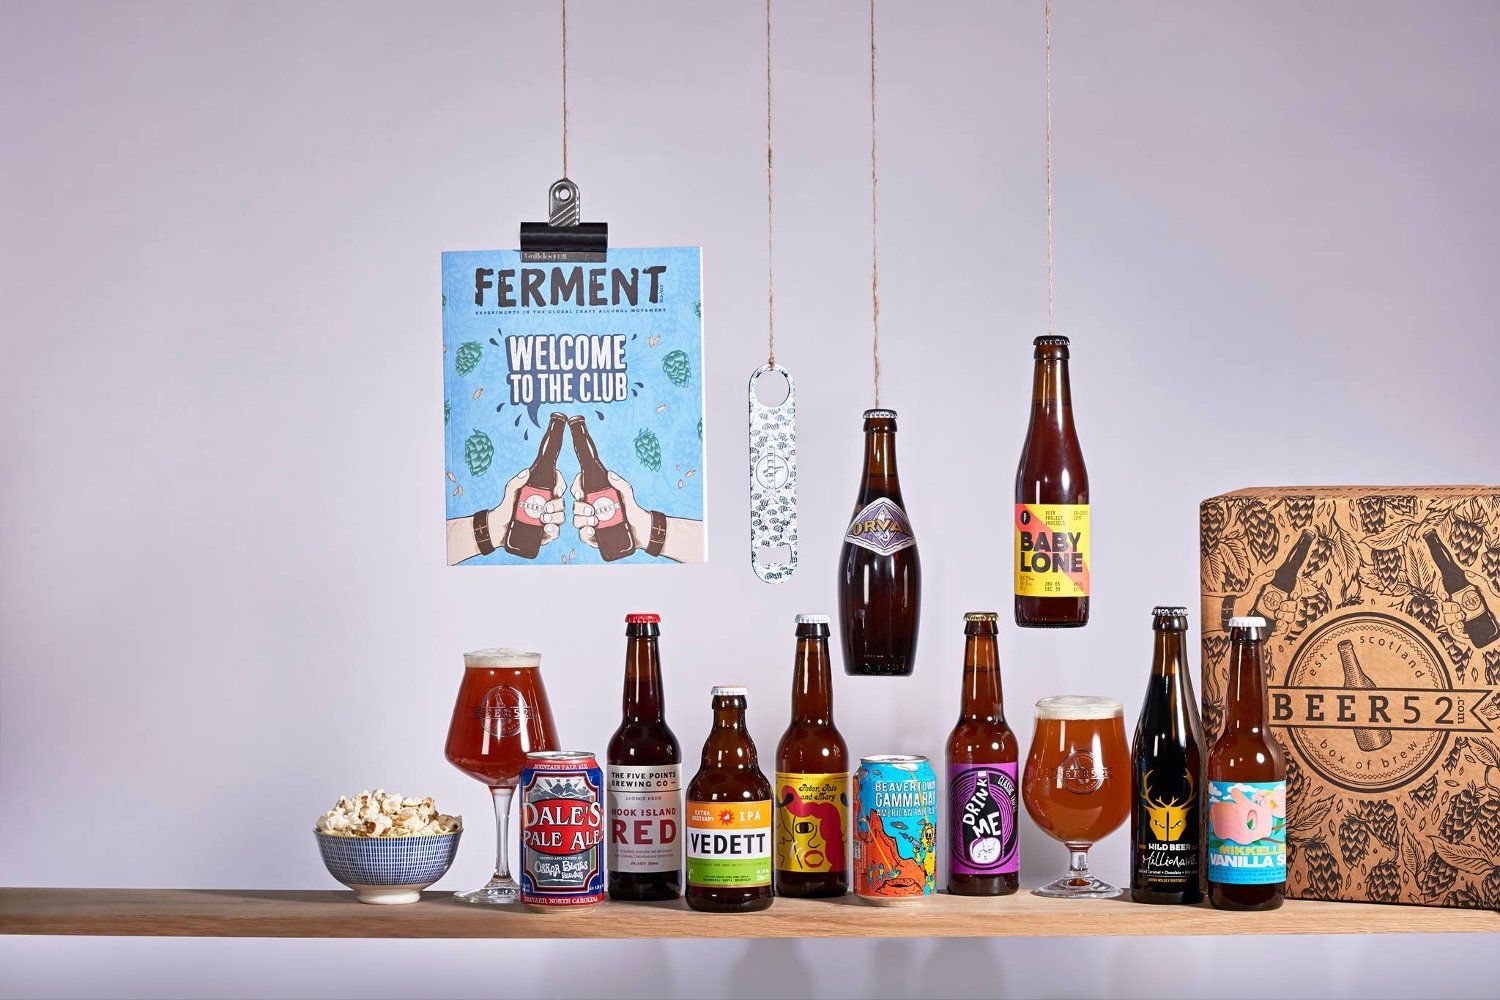 Father's Day gift idea subscription box from Beer52